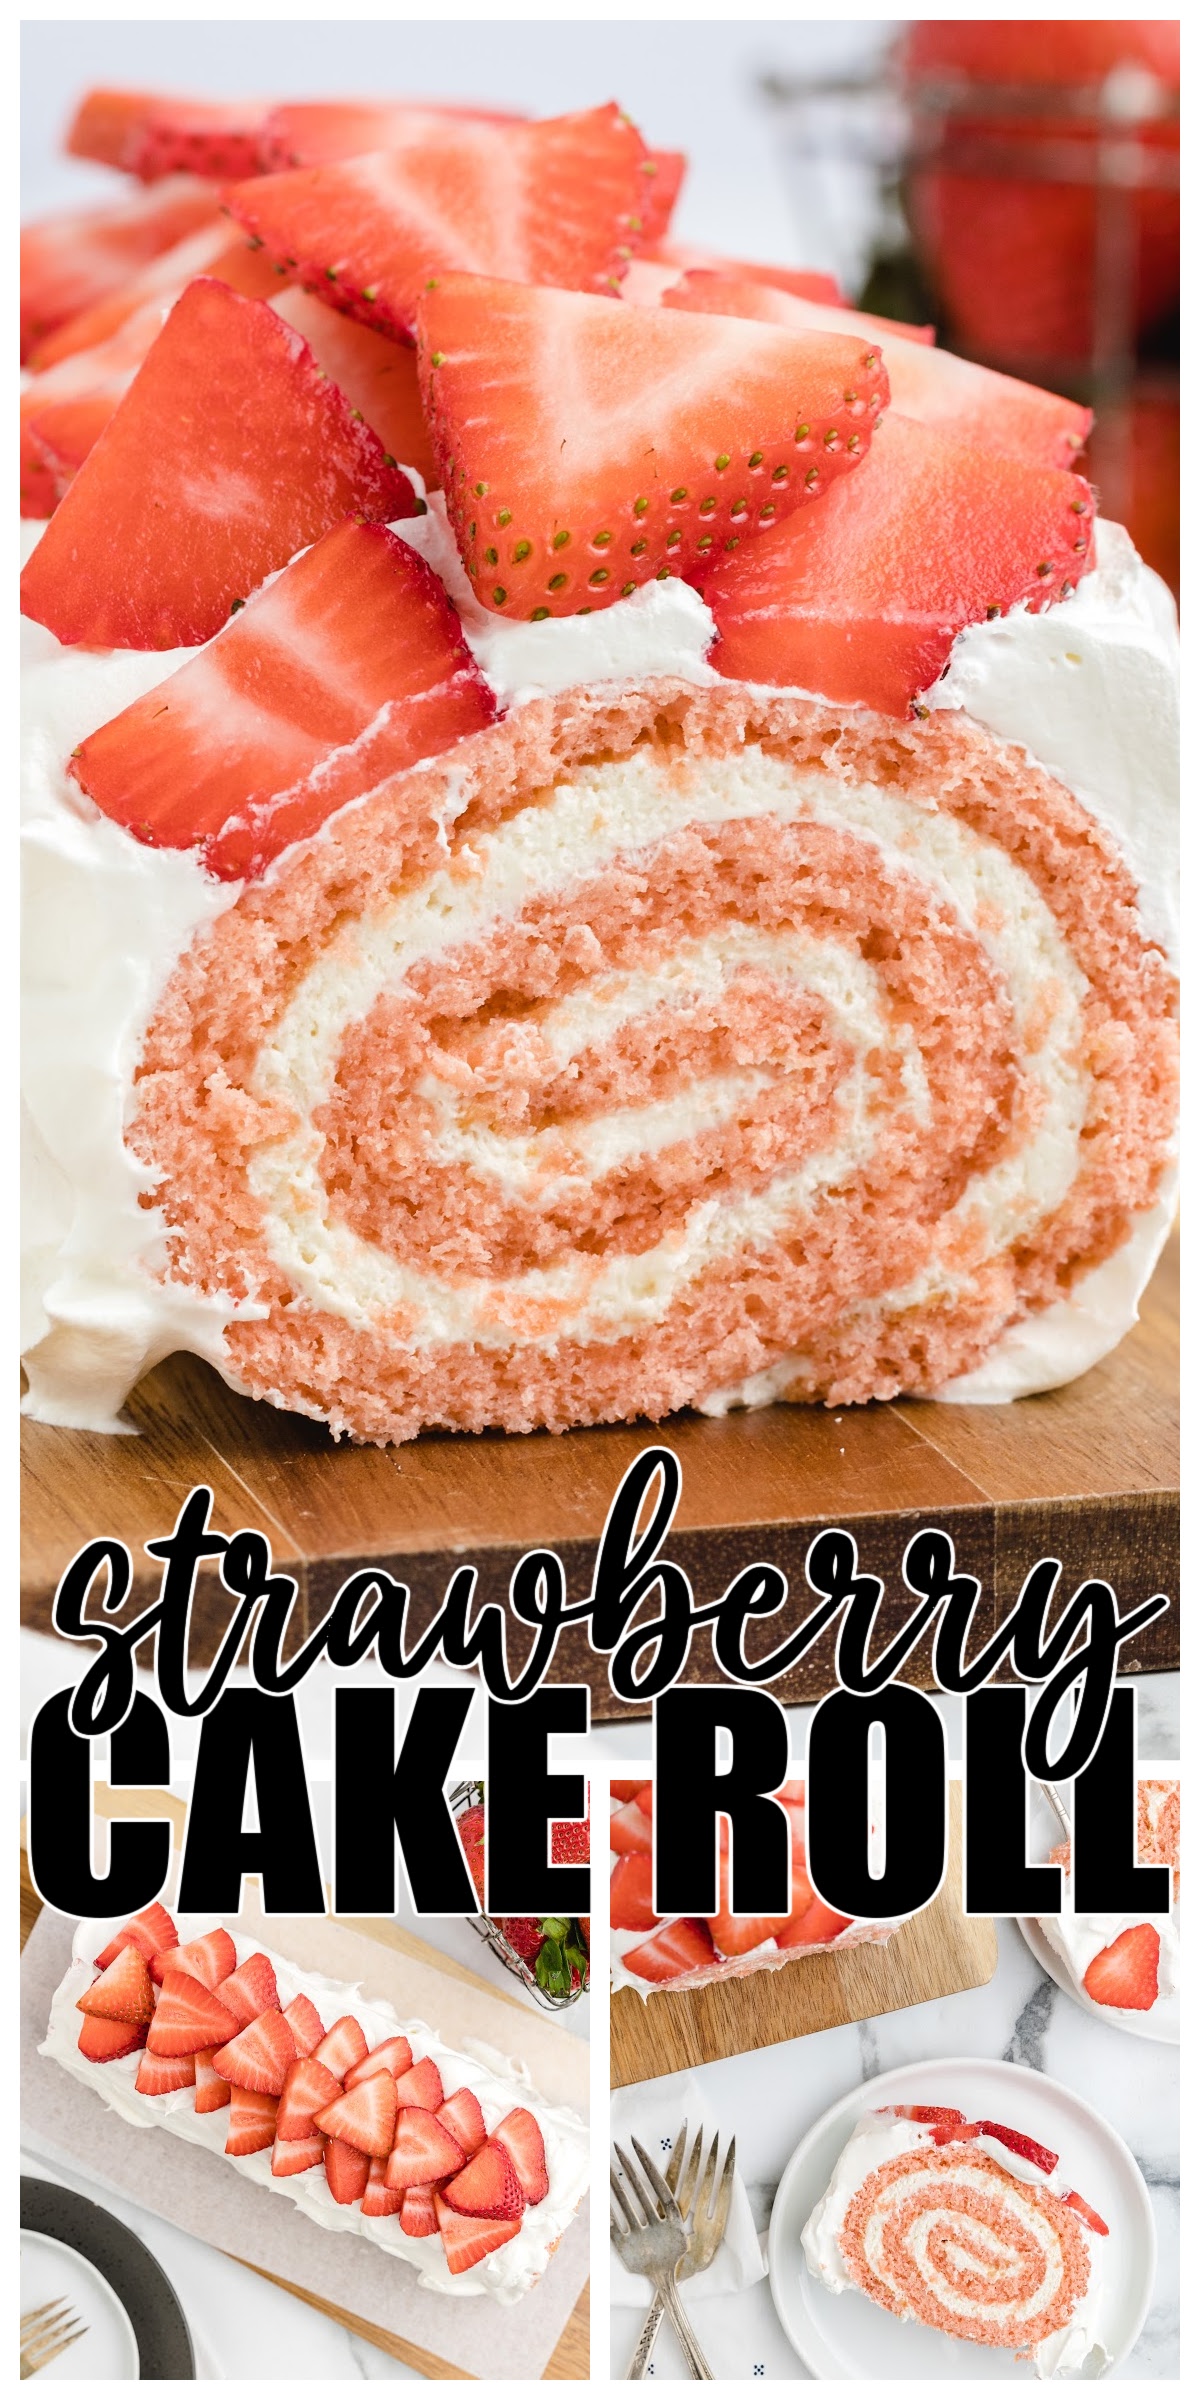 Strawberry Cake Roll - The Best Blog Recipes